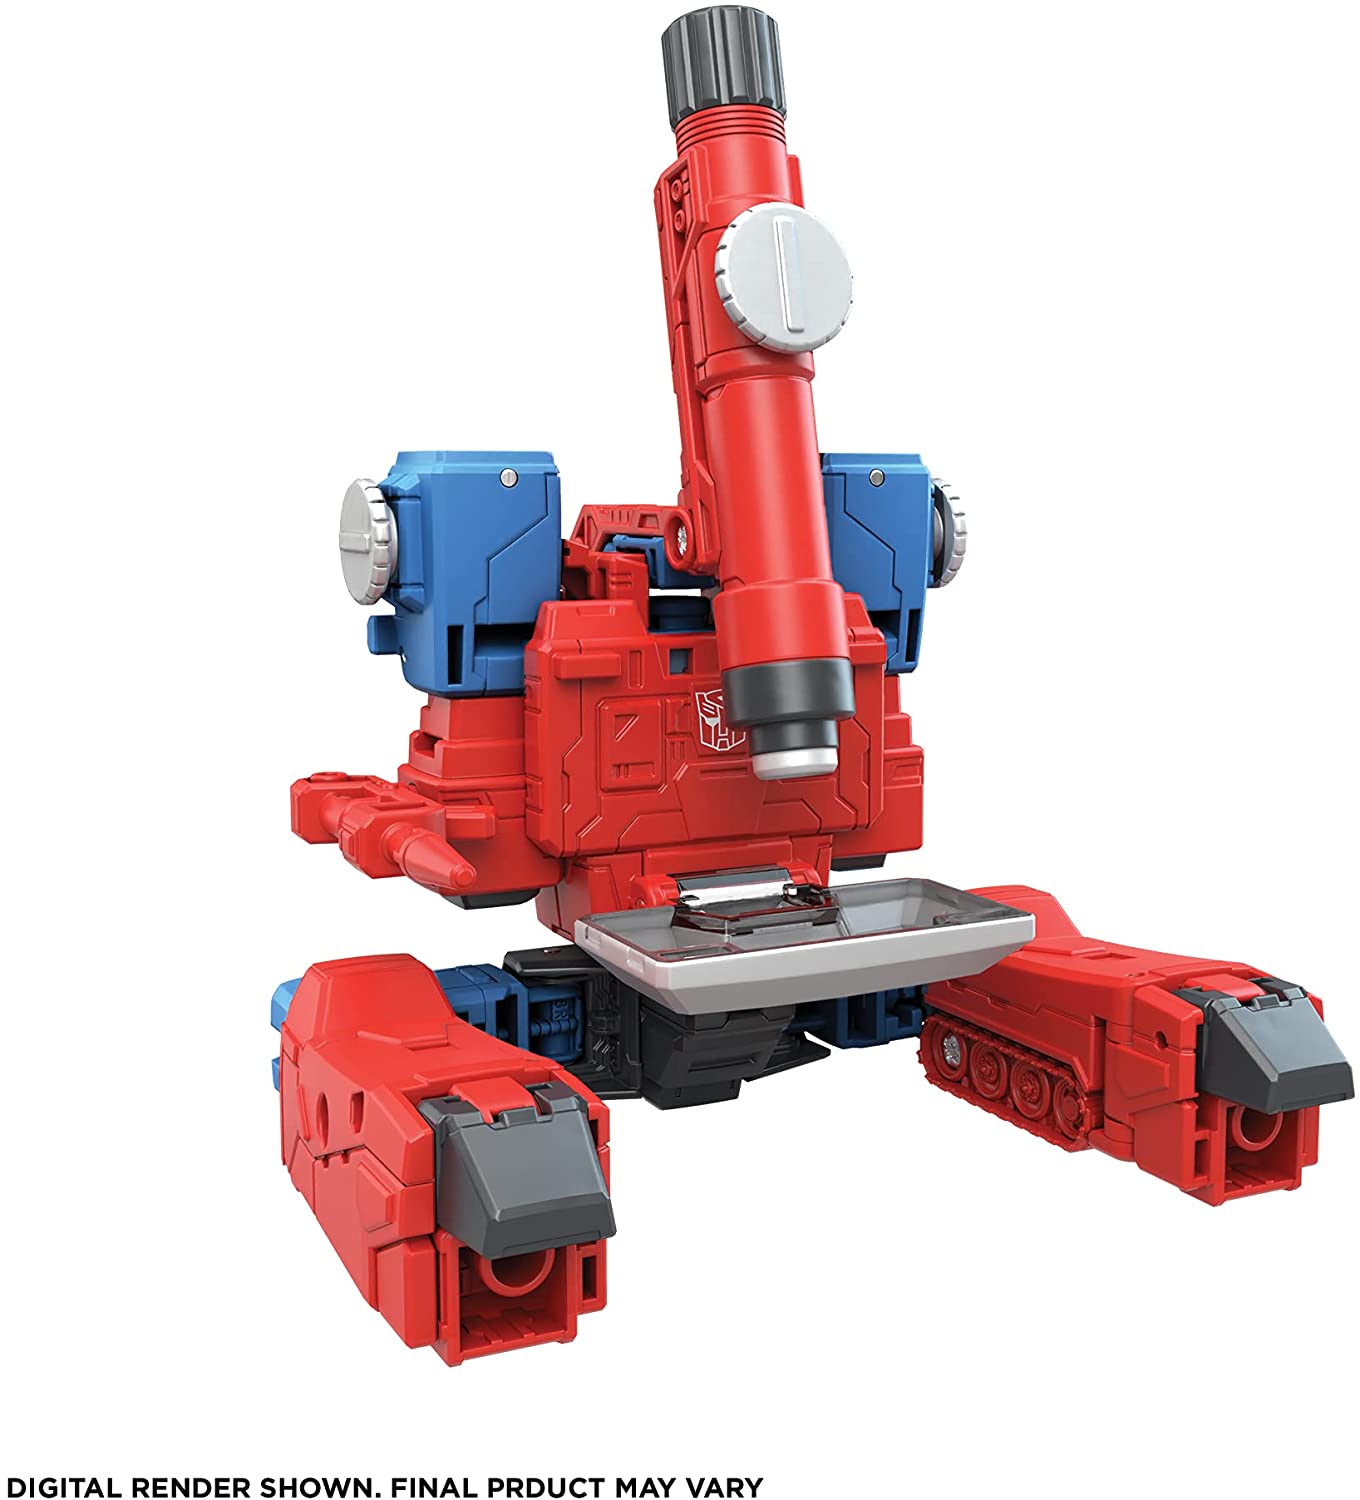 Hasbro Transformers Toys Studio Series 86-11 Deluxe Class The Movie Perceptor Action Figure - Ages 8 and Up, 4.5-inch - Action & Toy Figures Heretoserveyou